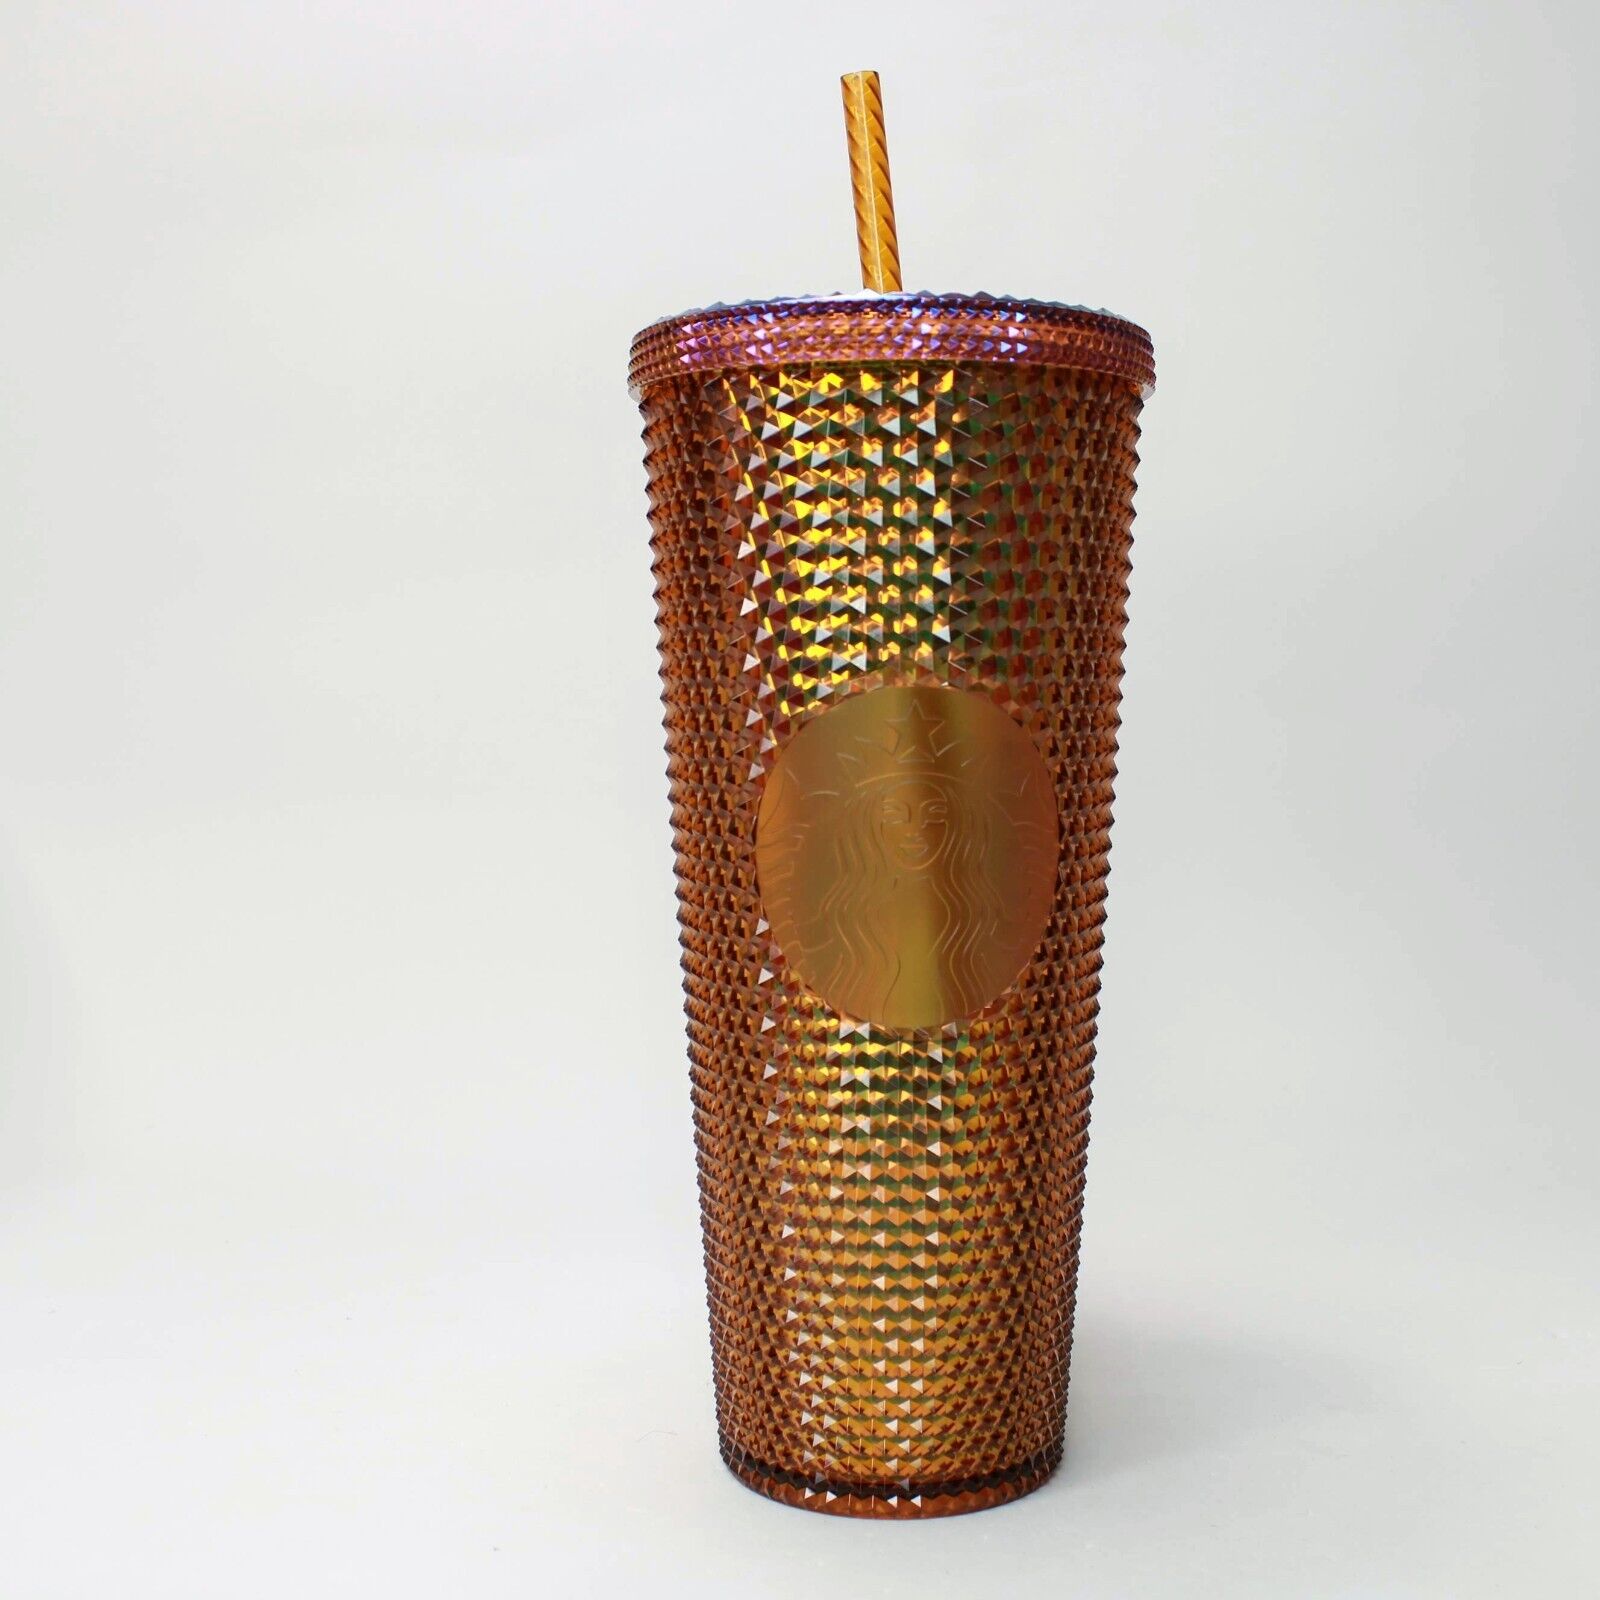 Starbucks 50th Anniversary Gold Studded Cold Cup Tumbler - 24oz